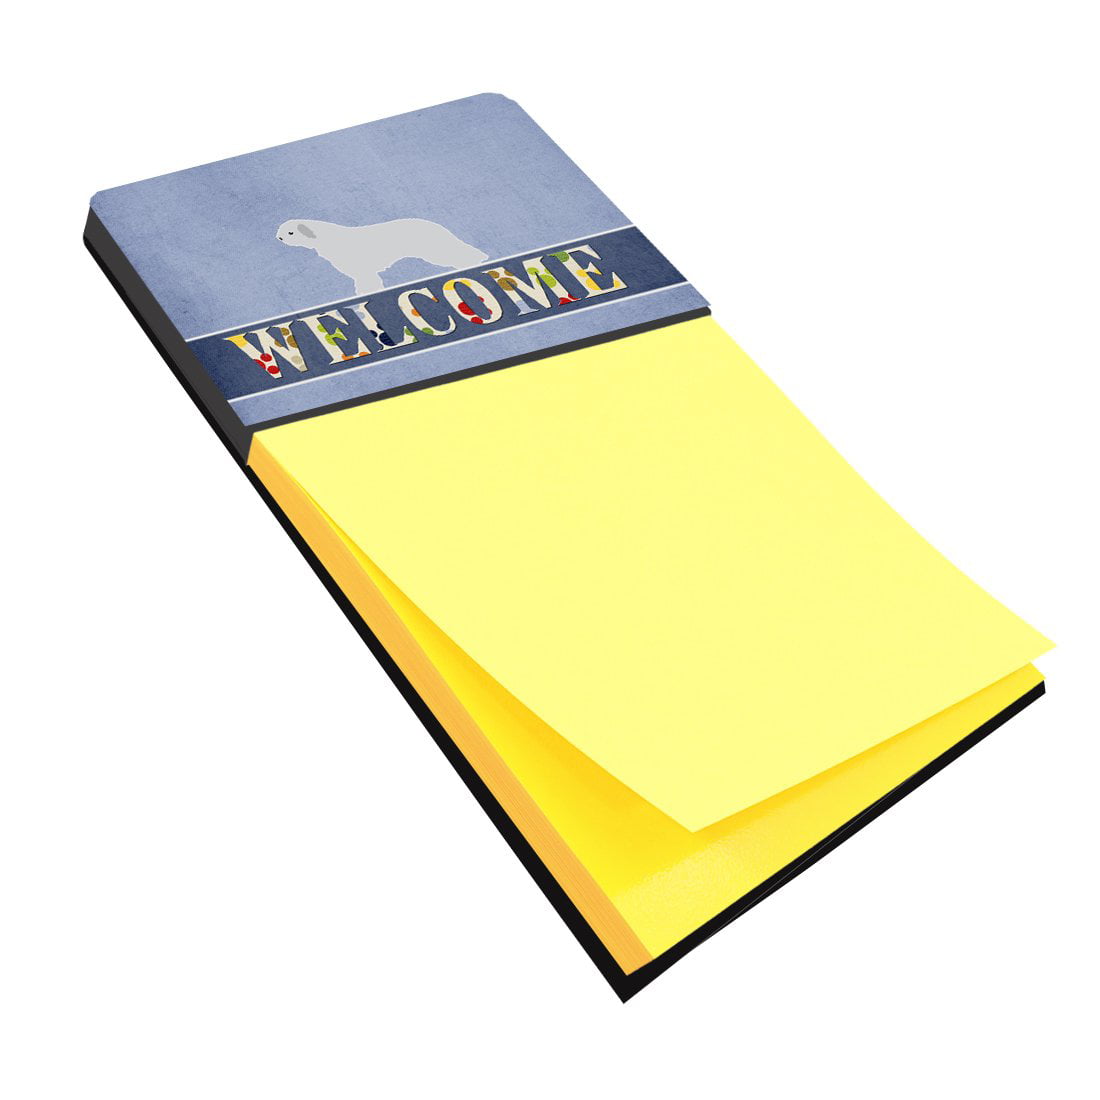 Bb5519sn Spanish Water Dog Welcome Sticky Note Holder